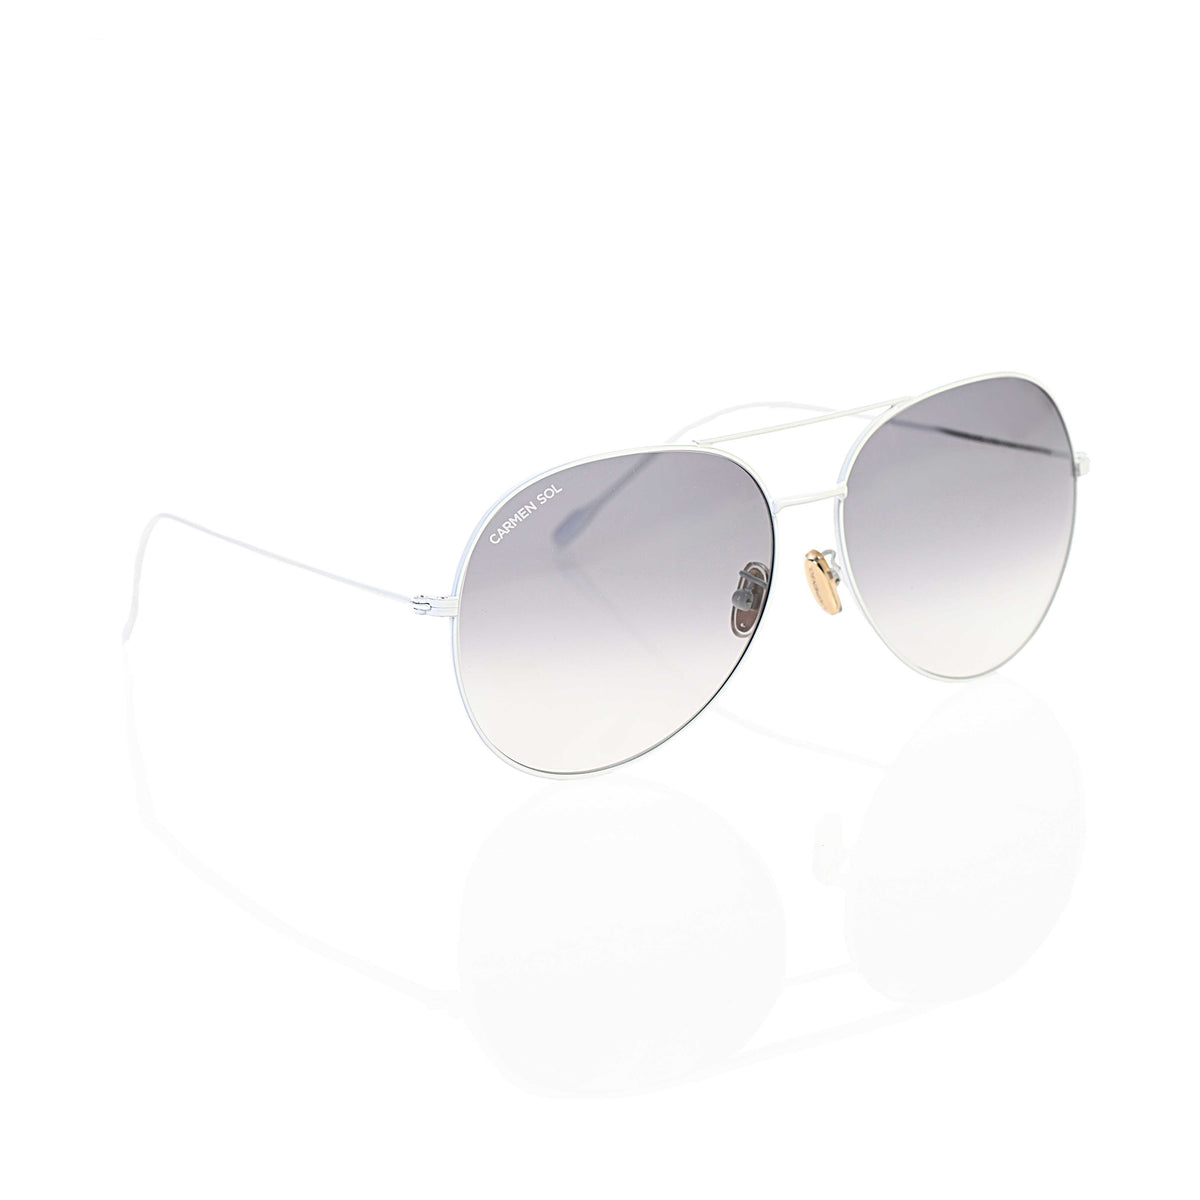 white aviator sunglasses that are the epitome of chic from Carmen sol